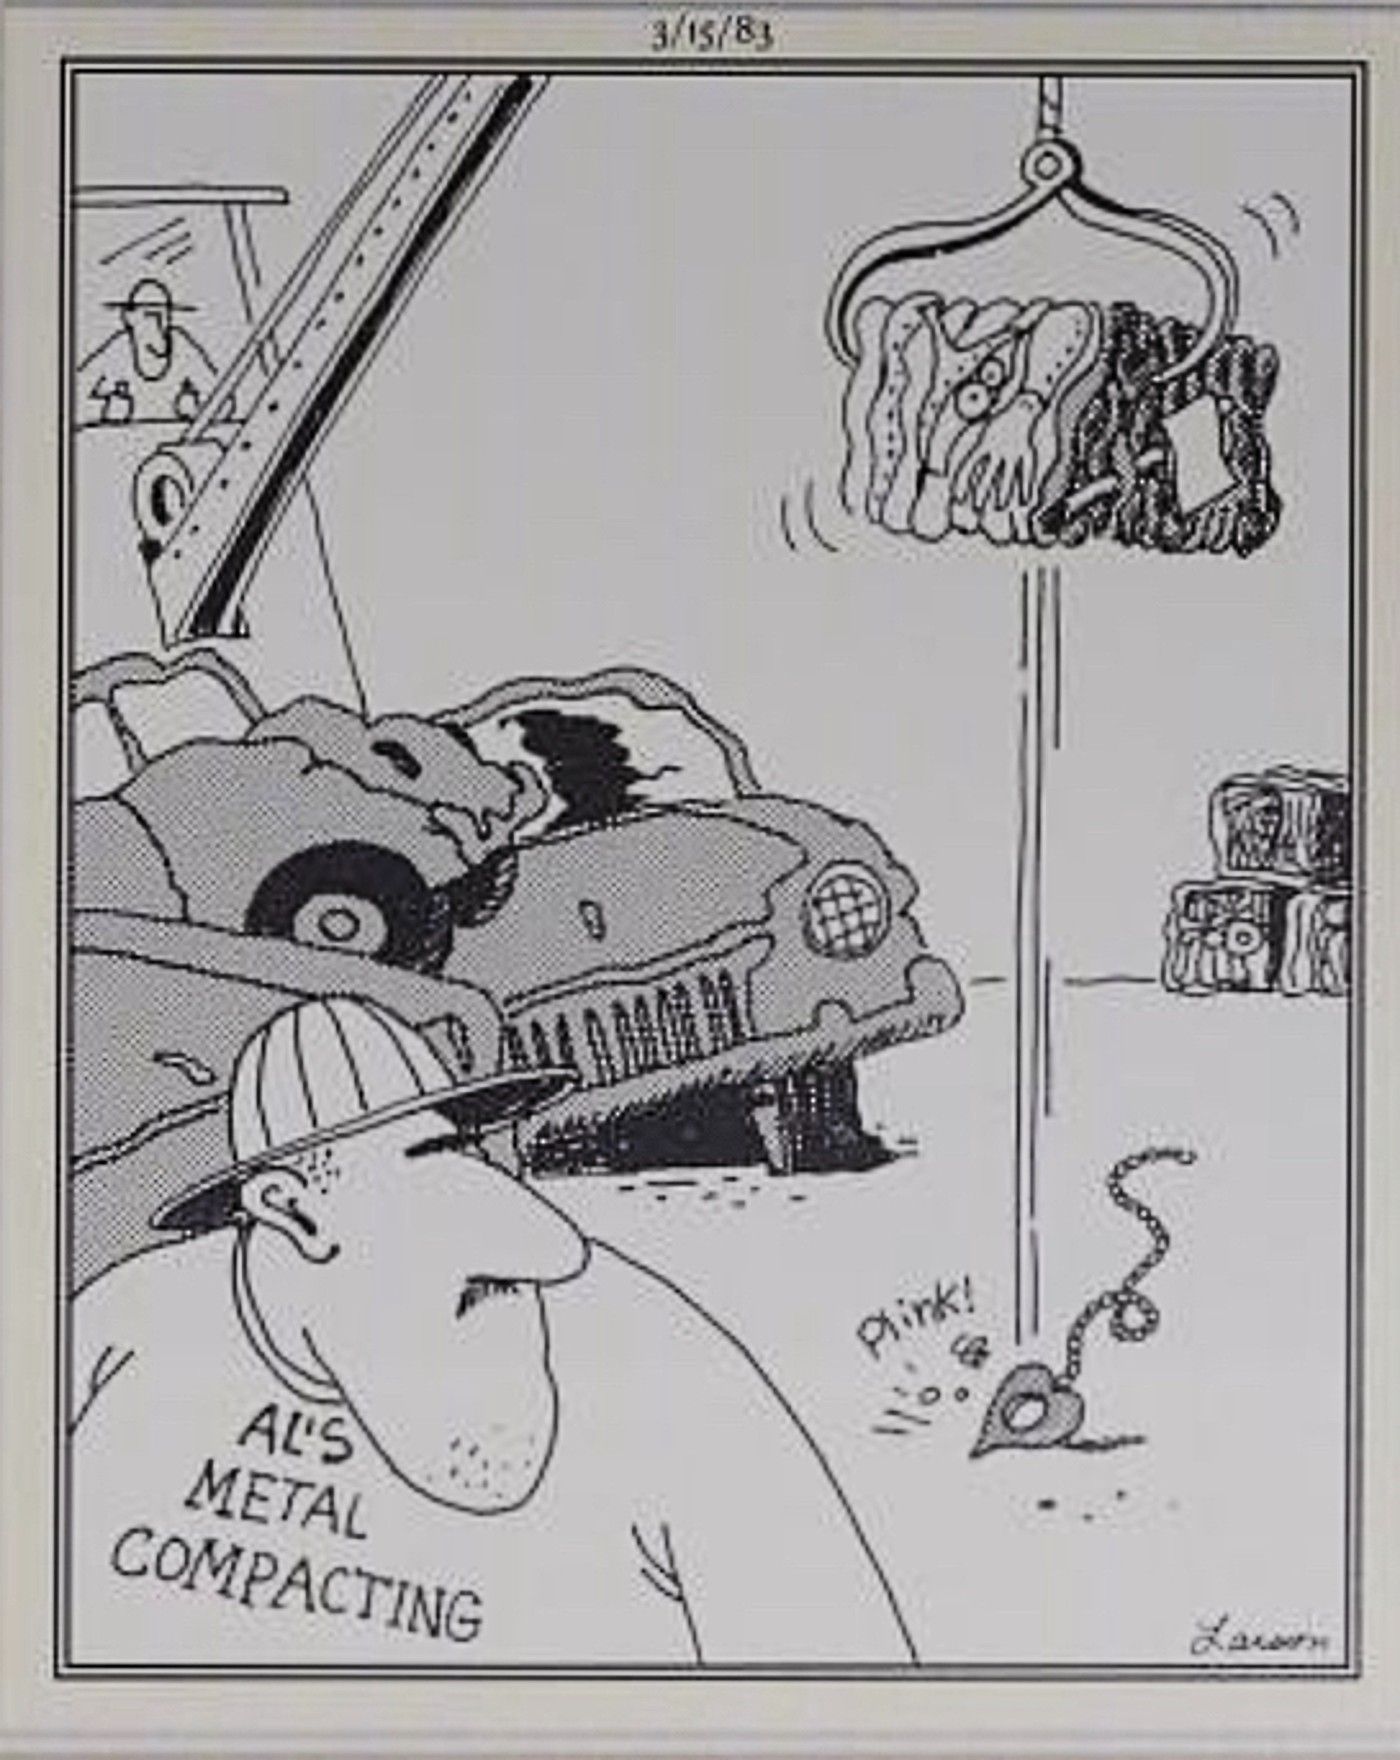 Far Side, Al's metal compacting accidentally crushes people